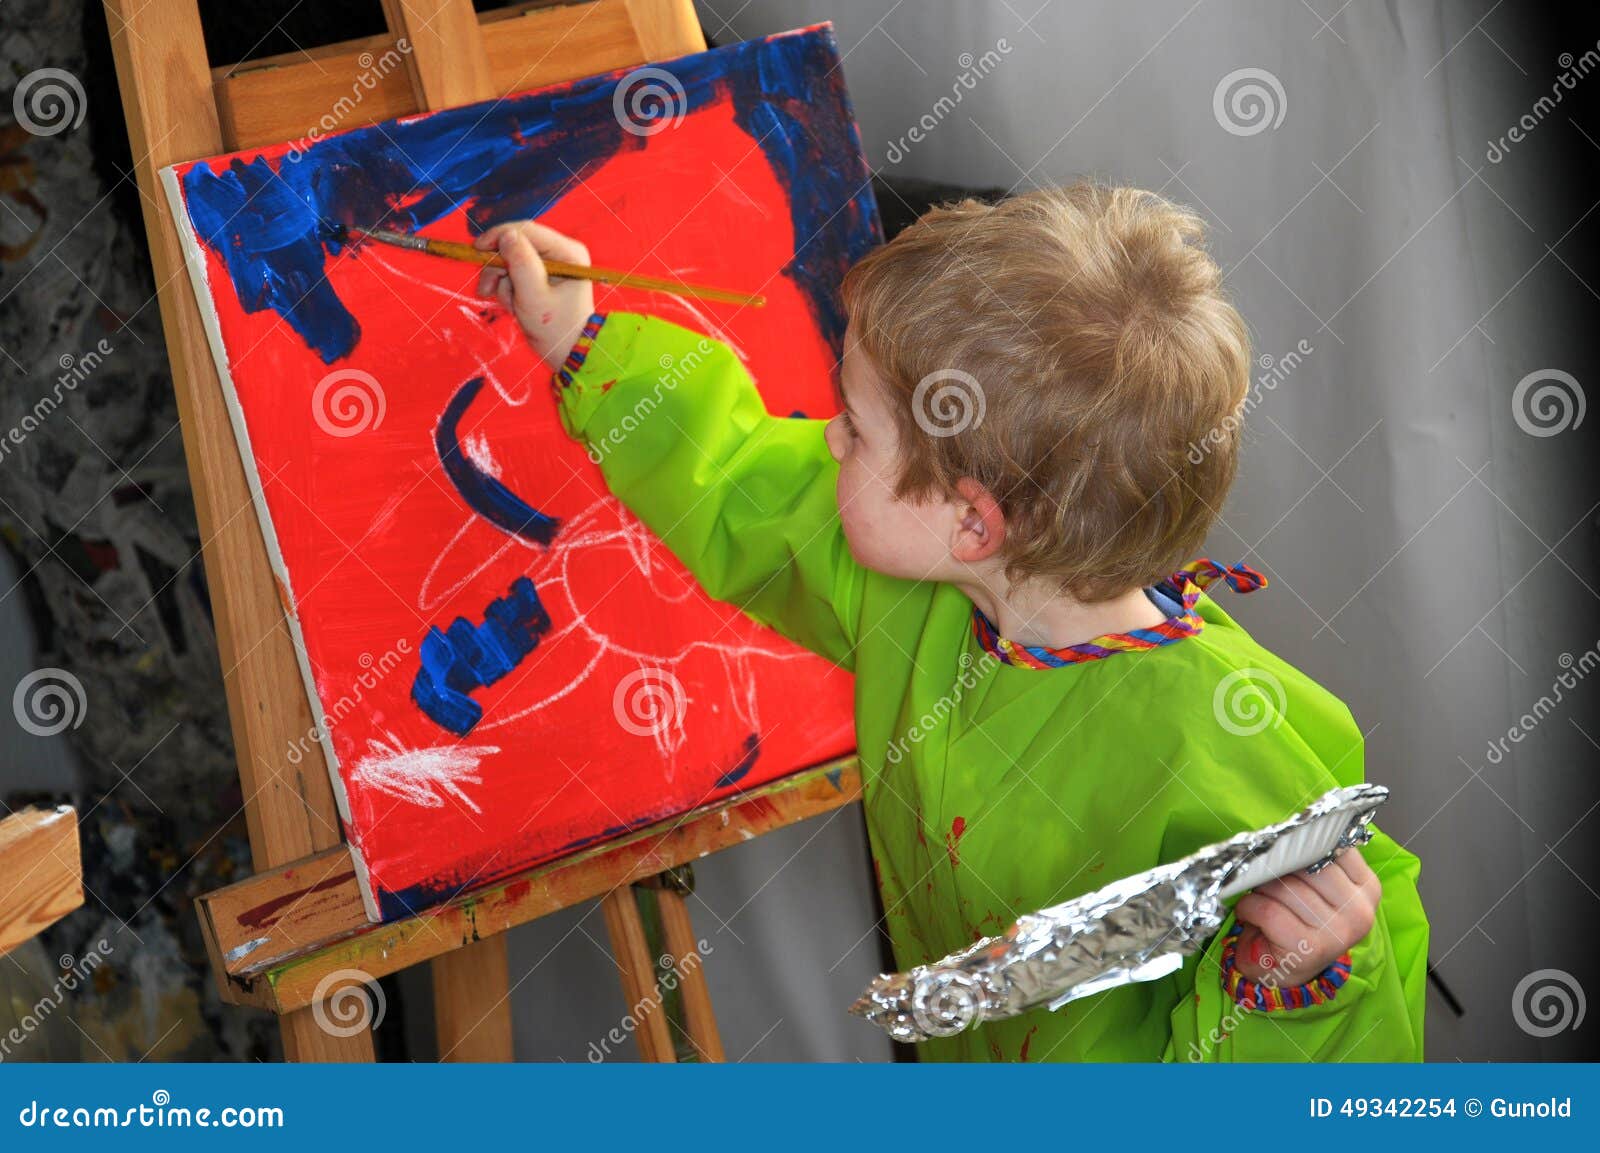 Painting boy stock photo. Image of education, active ...